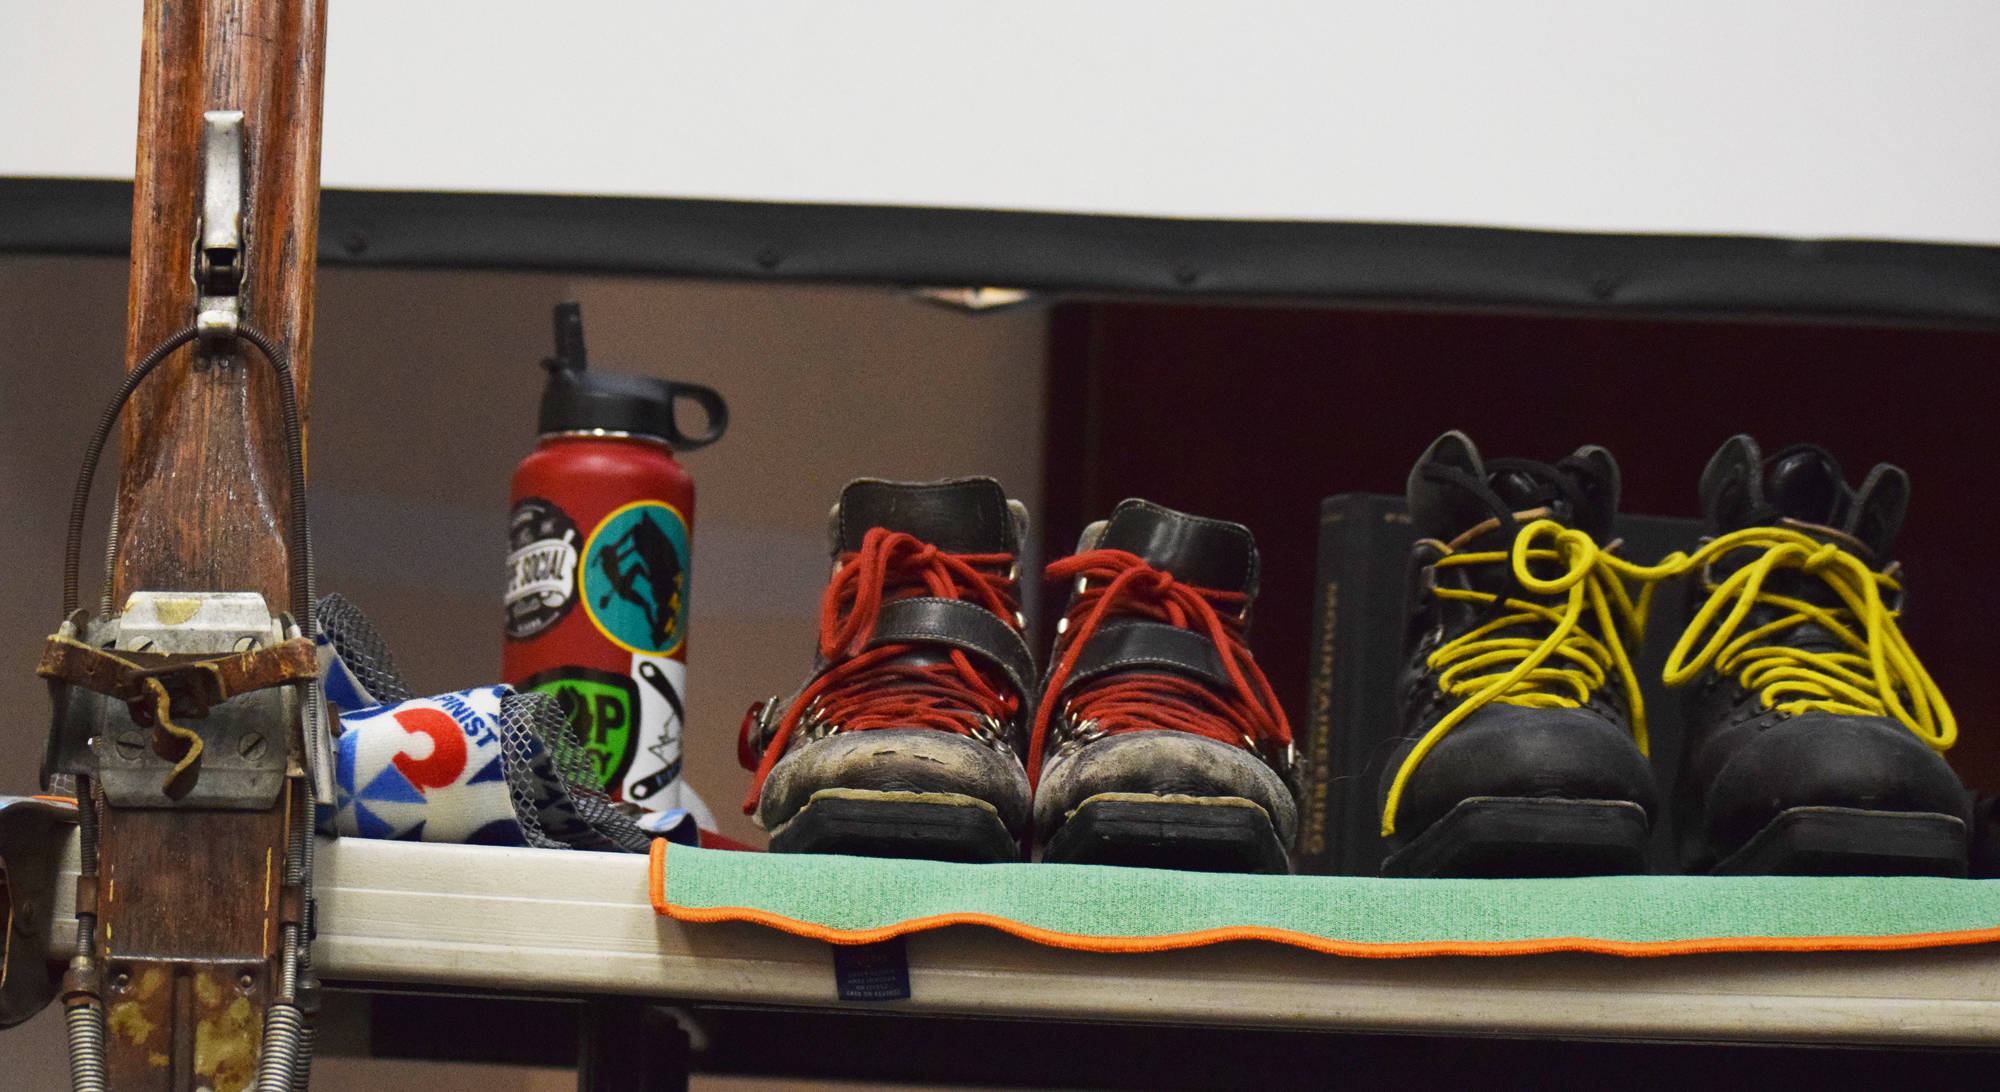 Ski boots line a table during a backcountry skiing presentation by Tony Doyle and Trent Sexton, Dec. 20 at the Kenai Visitors and Cultural Center. (Photo by Joey Klecka/Peninsula Clarion)